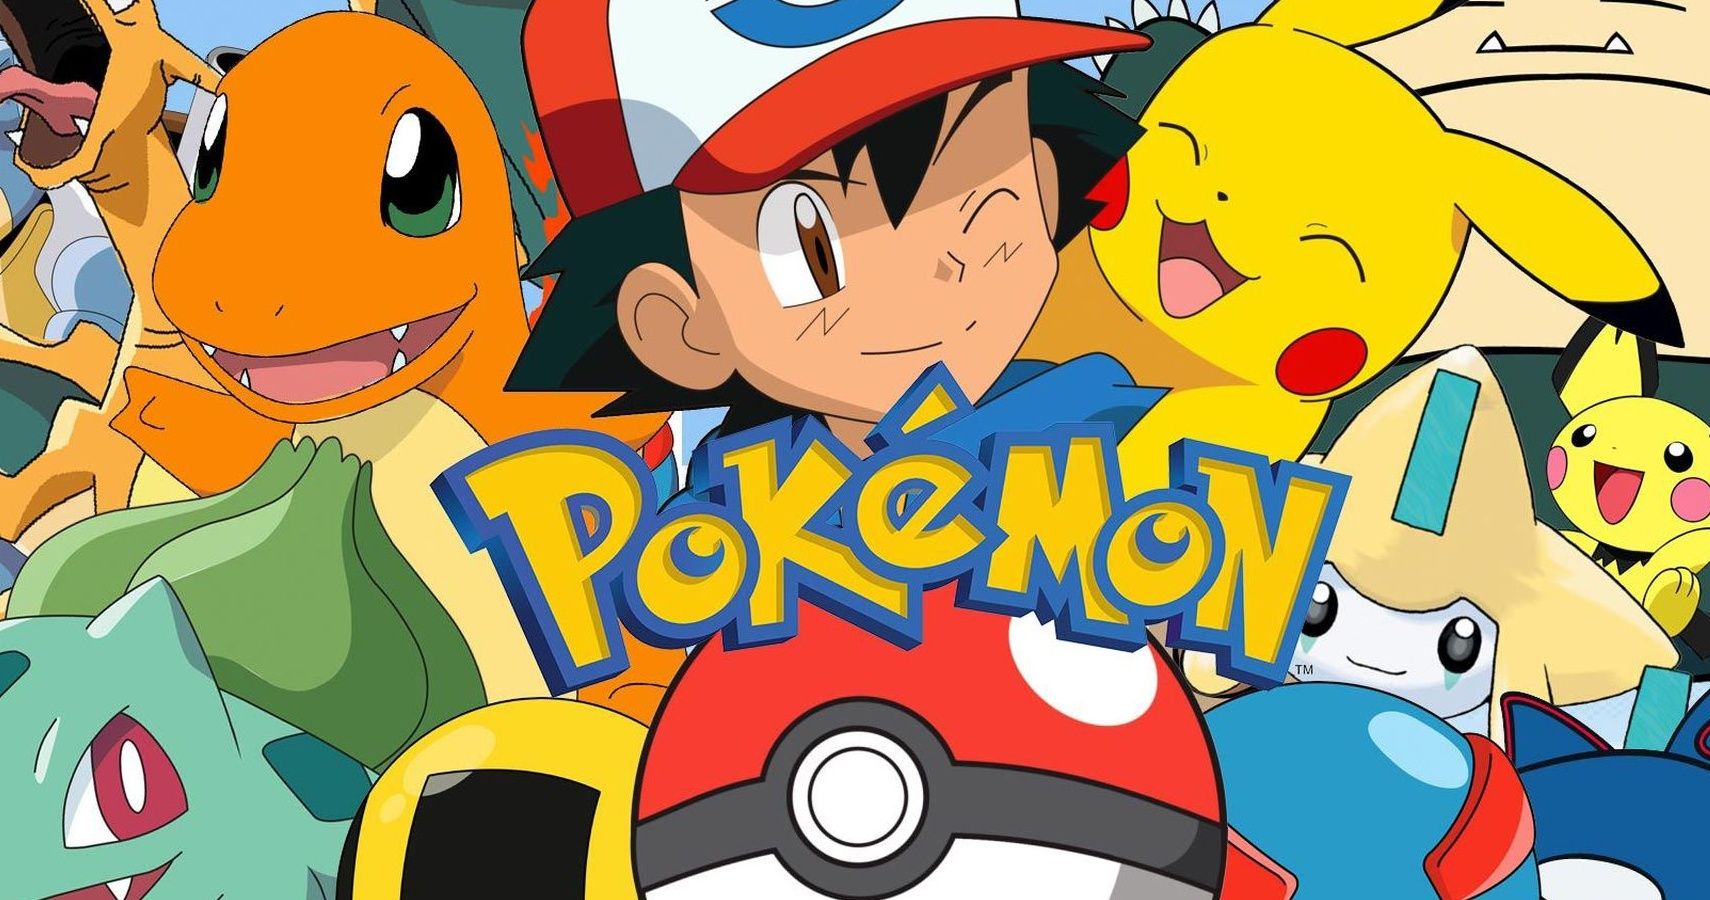 Pokemon Ranking Every Game In The Main Series Based On How Long They Take To Beat